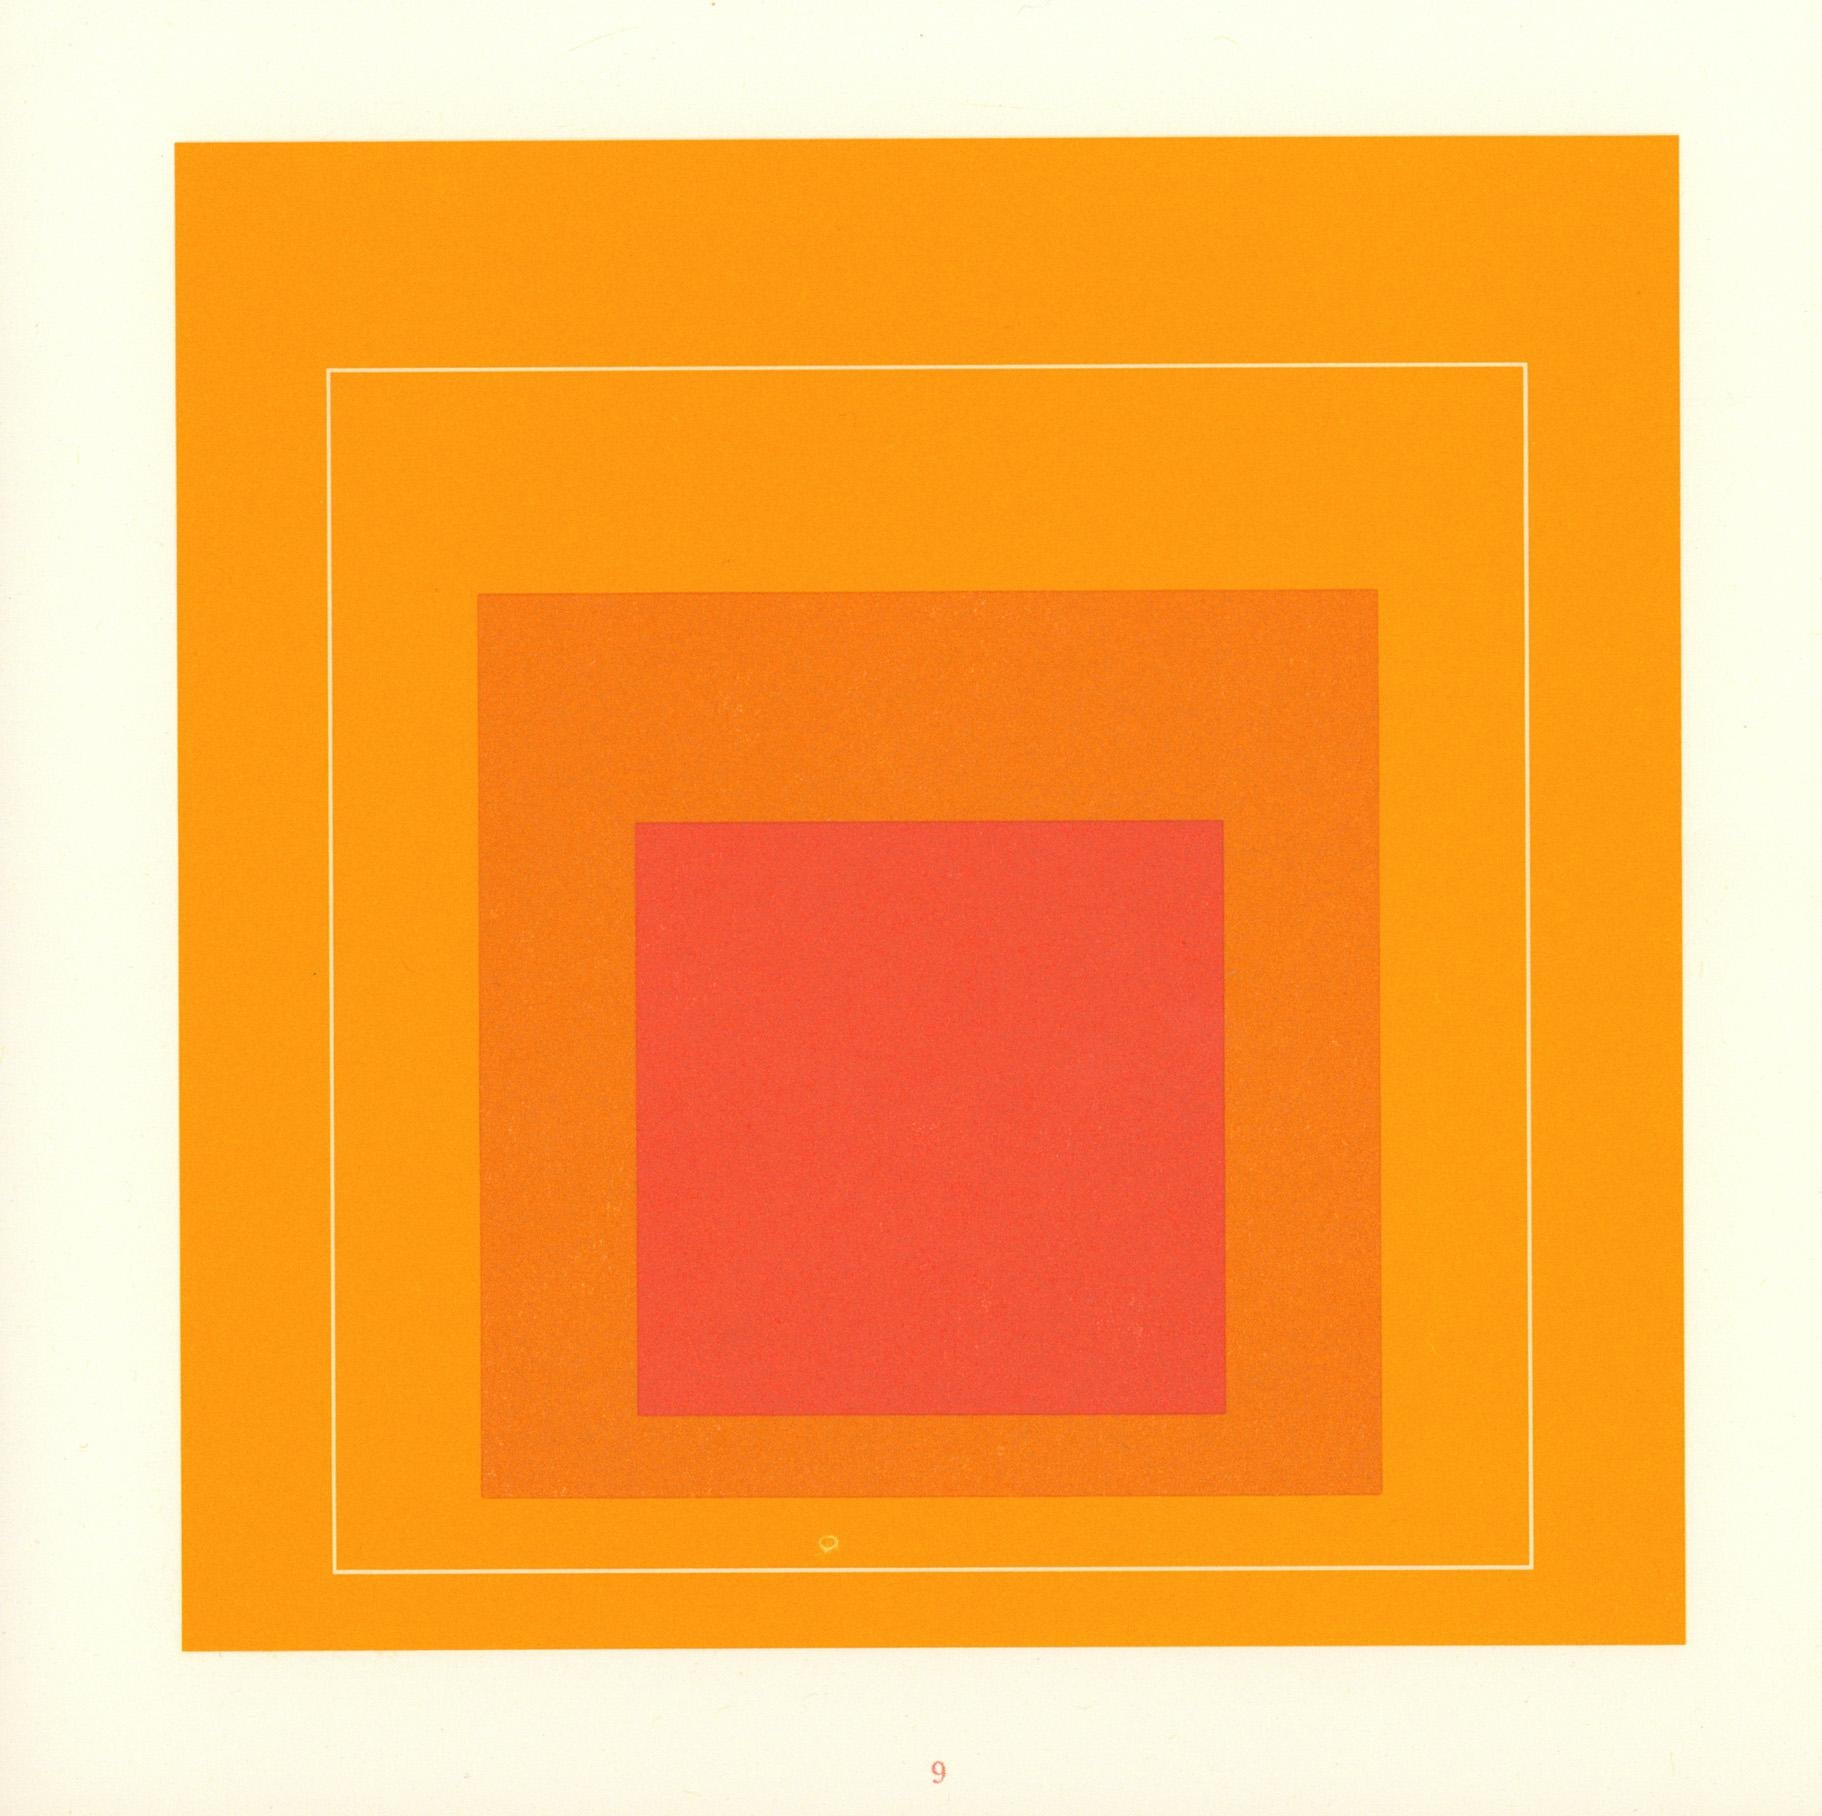 Josef Albers White Line Squares 1967: 
Set of eight 7.5 x 7.5 inch lithographs published to announce the release of Albers' 1967 'White Line Squares' suite by Gemini Los Angeles, 1967.  

Medium: 8 individual lithographs in colors housed in their